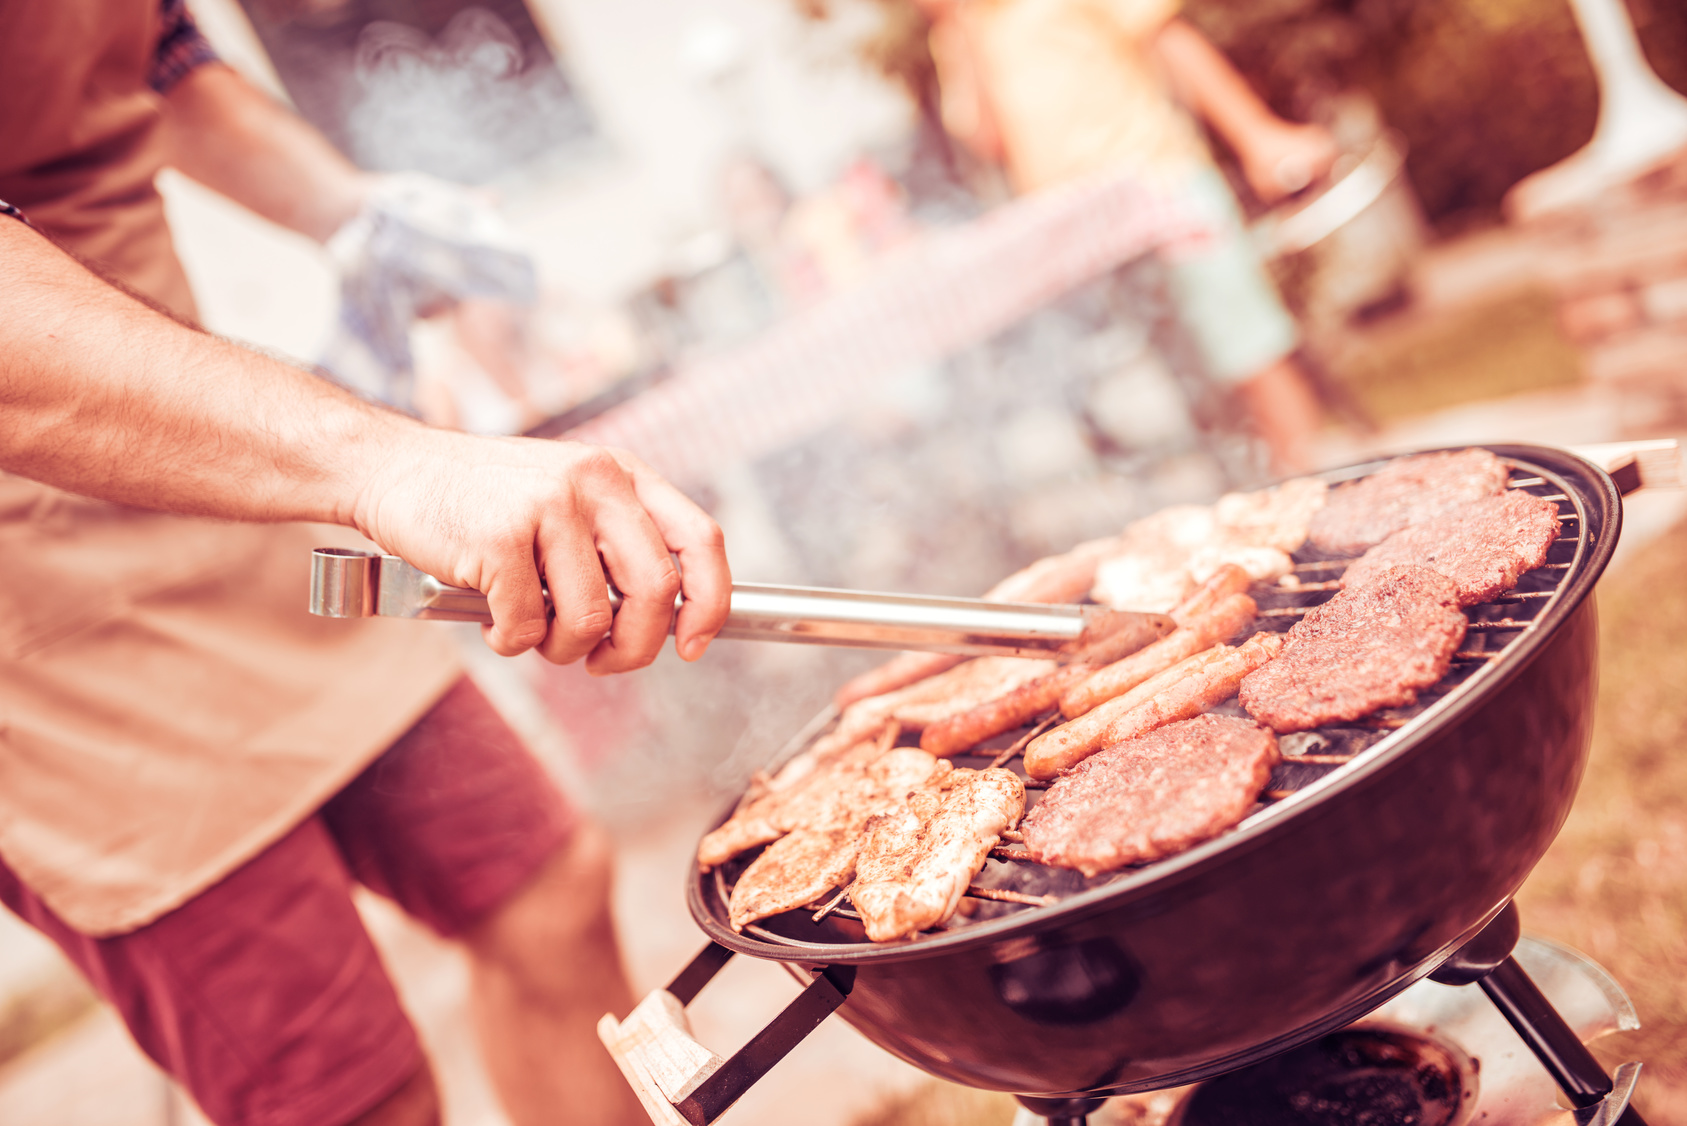 The Grilled Meat Temperature Guide: How to Cook the Perfect Meat